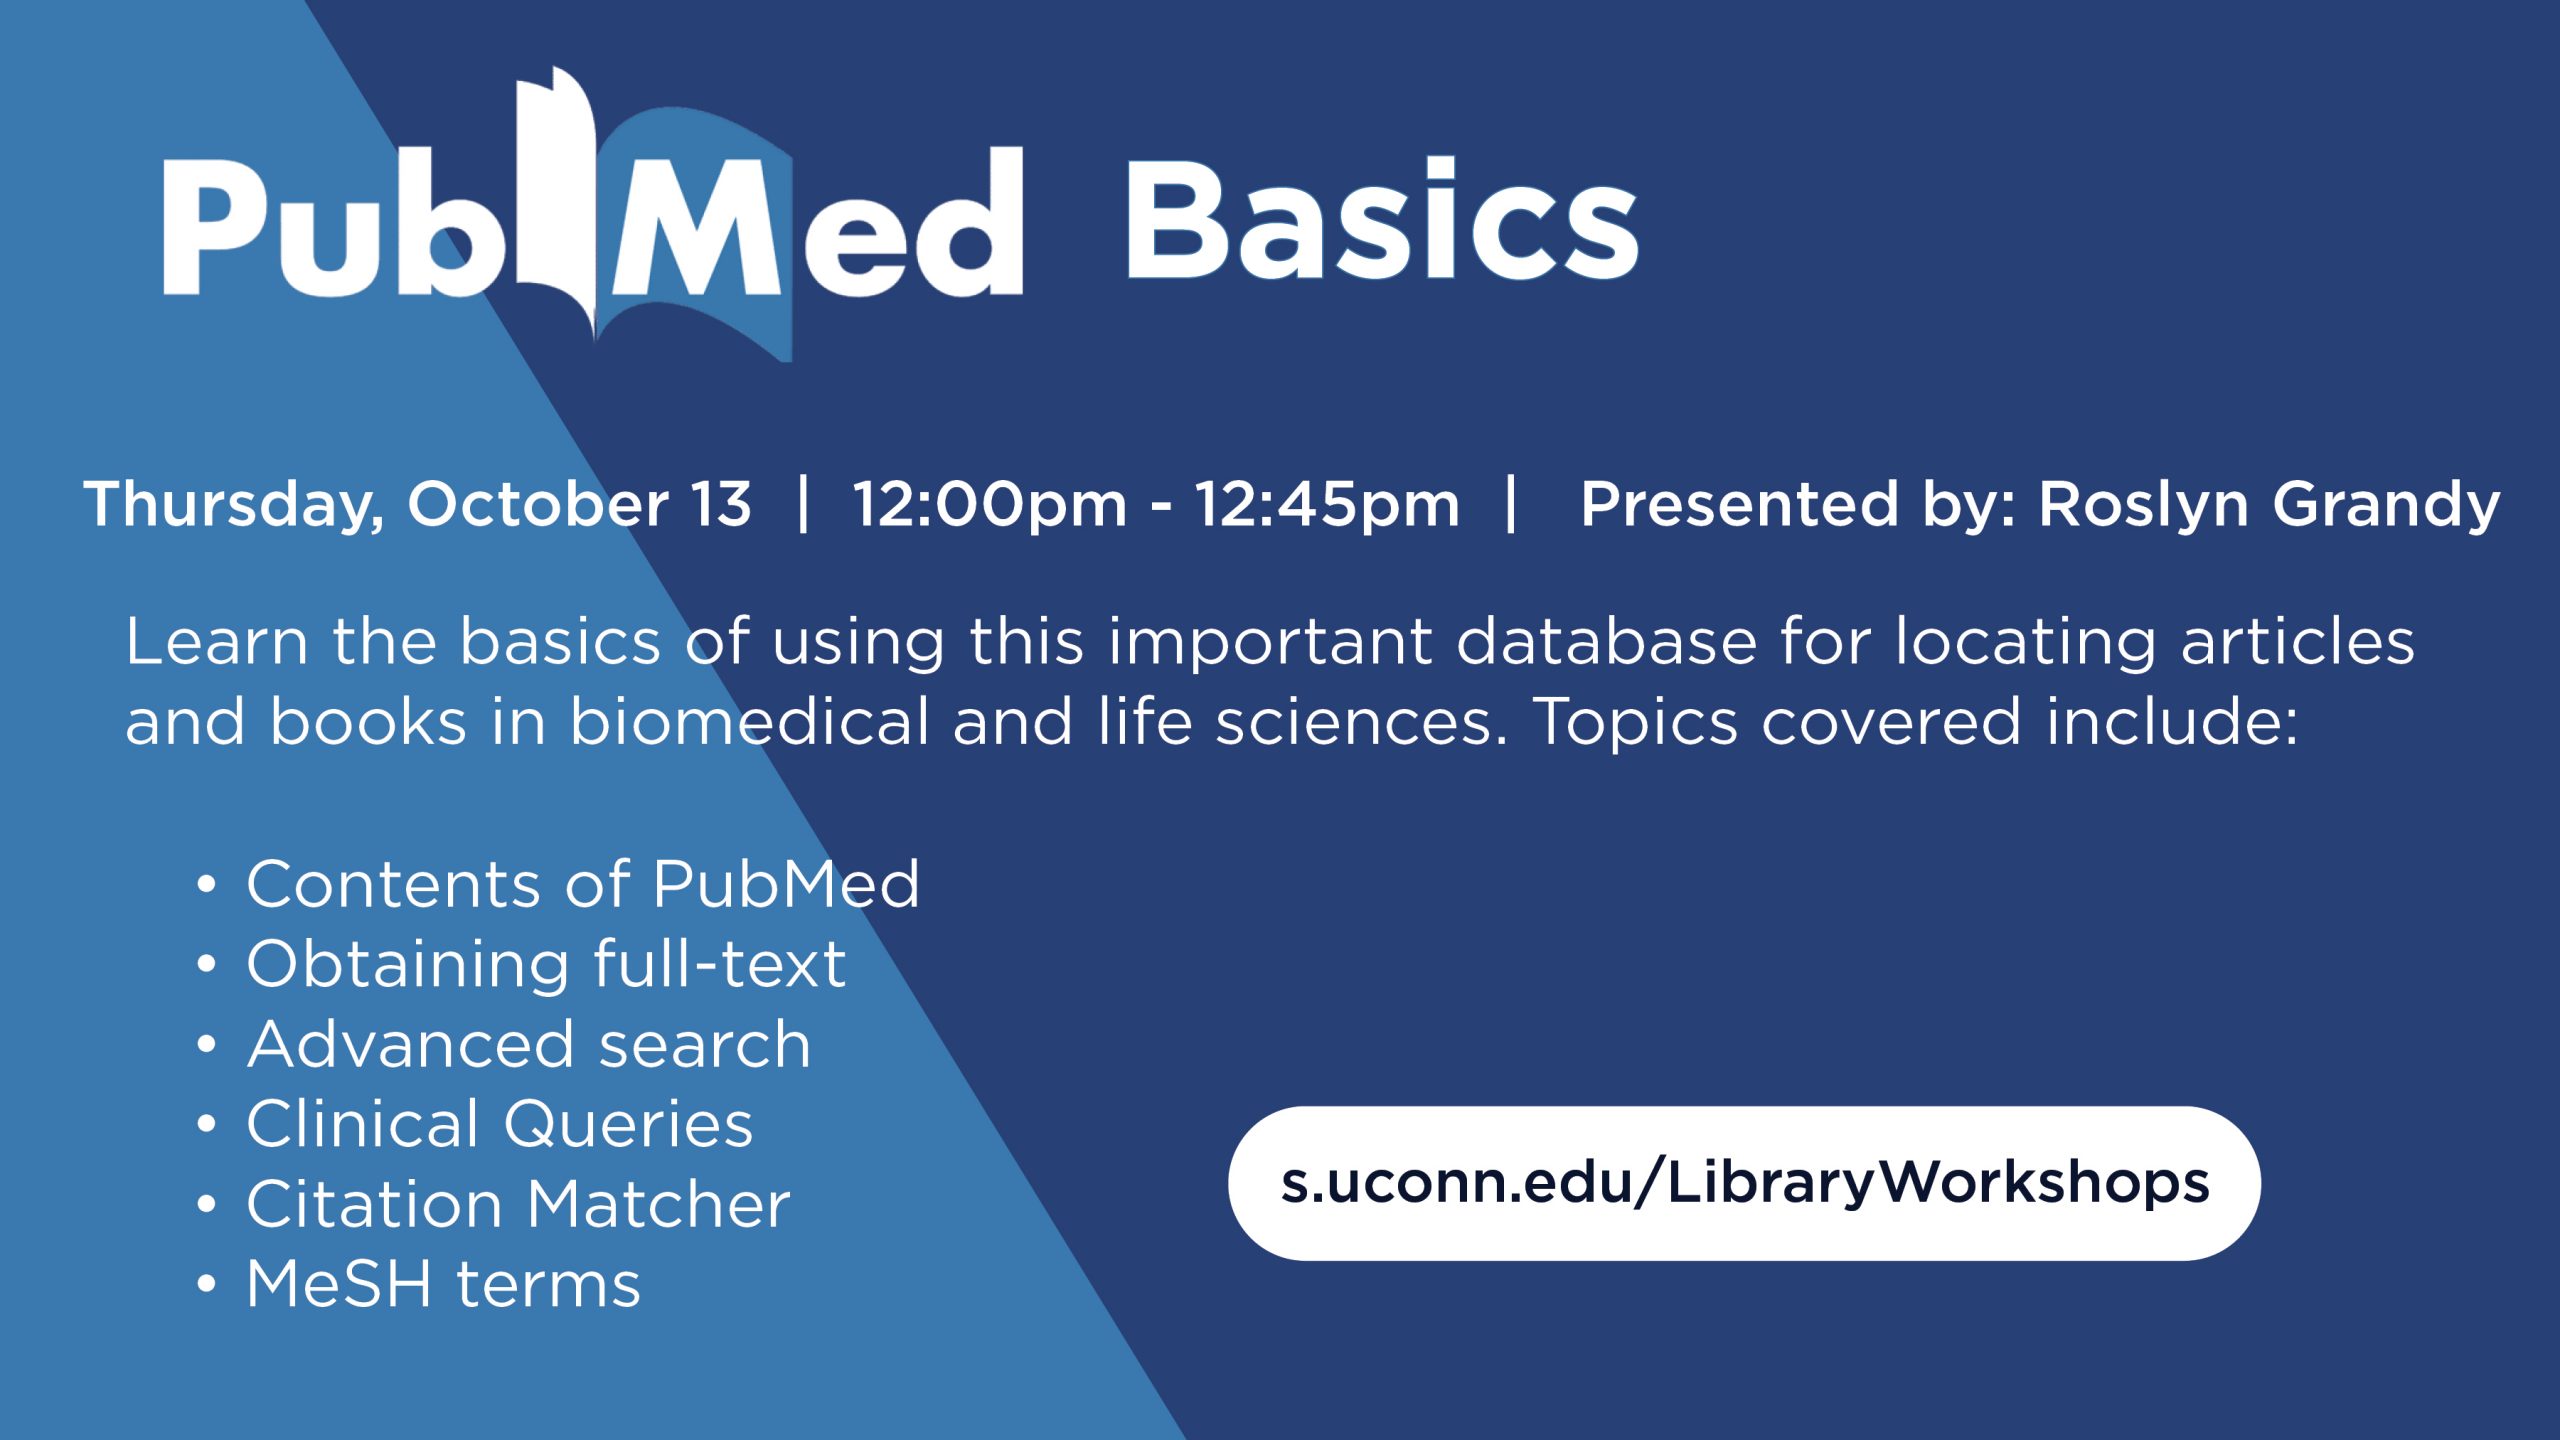 Workshop marketing image with a blue background and white text that reads: PubMed Basics, Thursday, October 13, 12:00pm - 12:45pm. Presented by: Roslyn Grandy. Learn the basics of using this important database for locating articles and books in biomedical and life sciences. Topics covered include: Contents of PubMed, Obtaining full-text, Advanced search, Clinical Queries, Citation Matcher, MeSH terms, s.uconn.edu/LibraryWorkshops